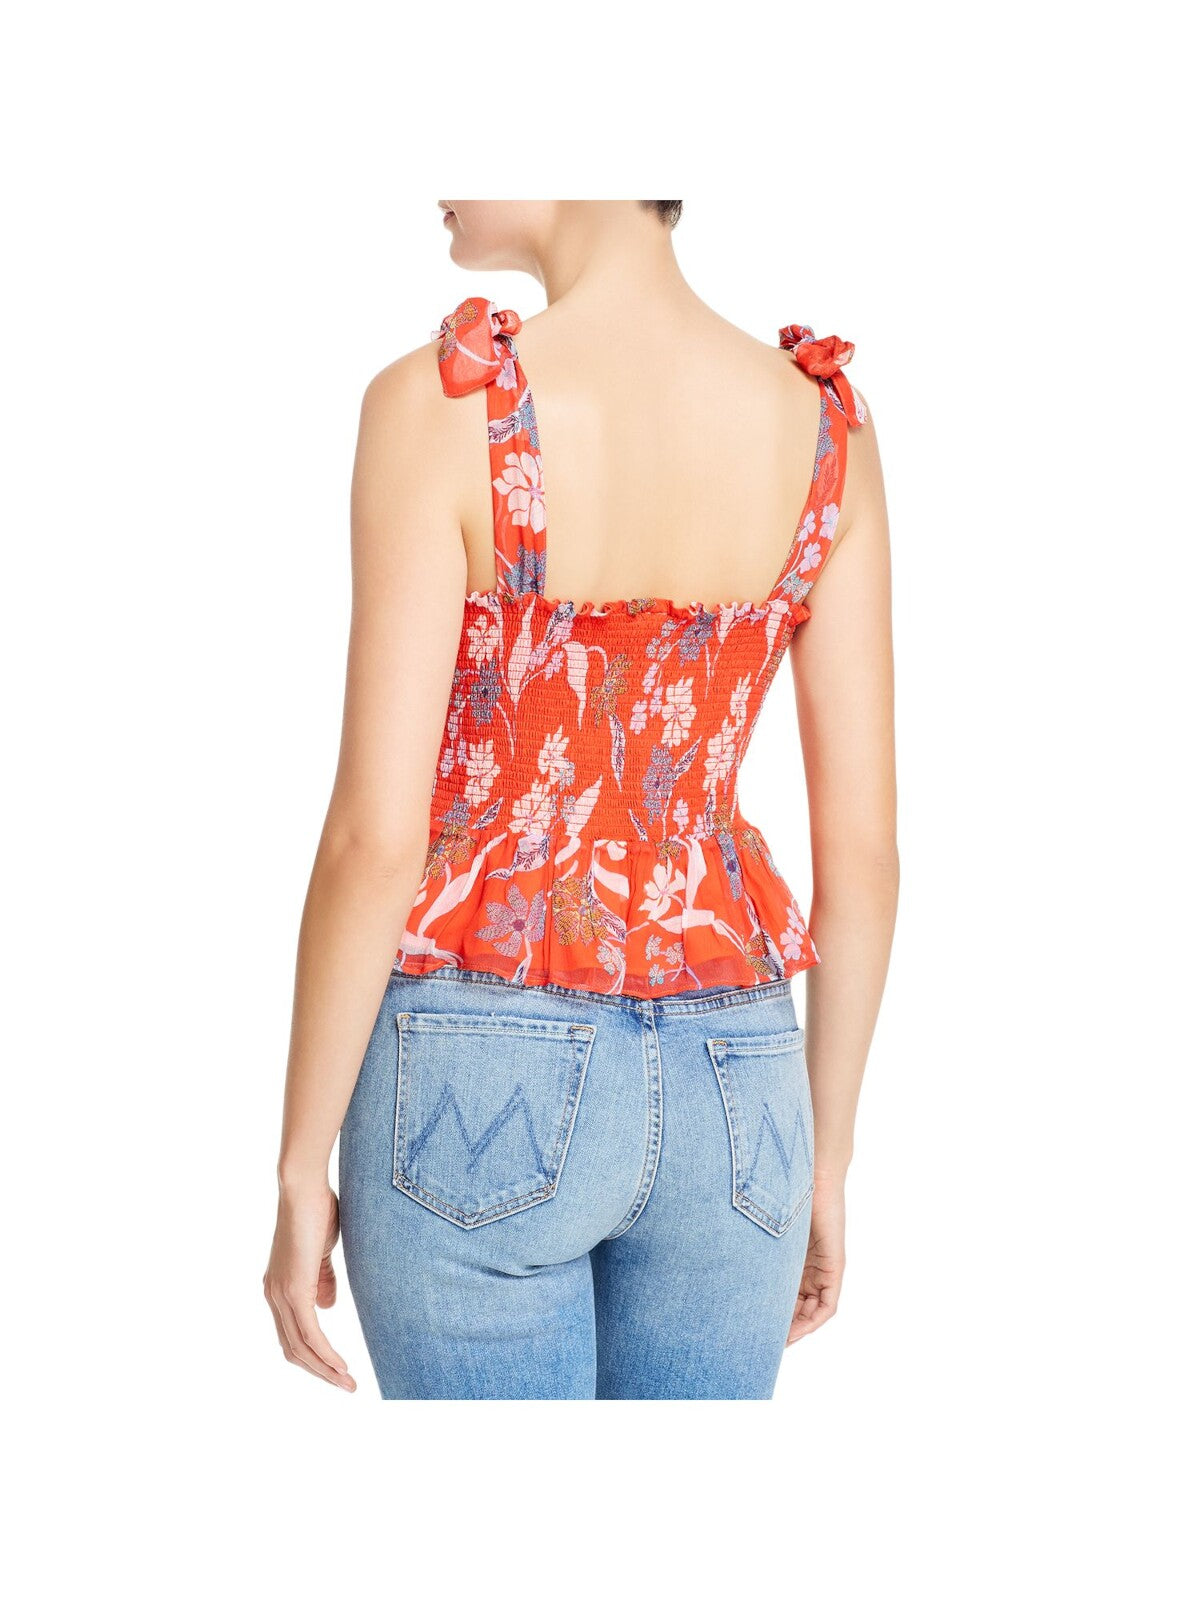 DOLAN Womens Red Stretch Smocked Ruffled Pleated Tank Floral Sleeveless Square Neck Top XS